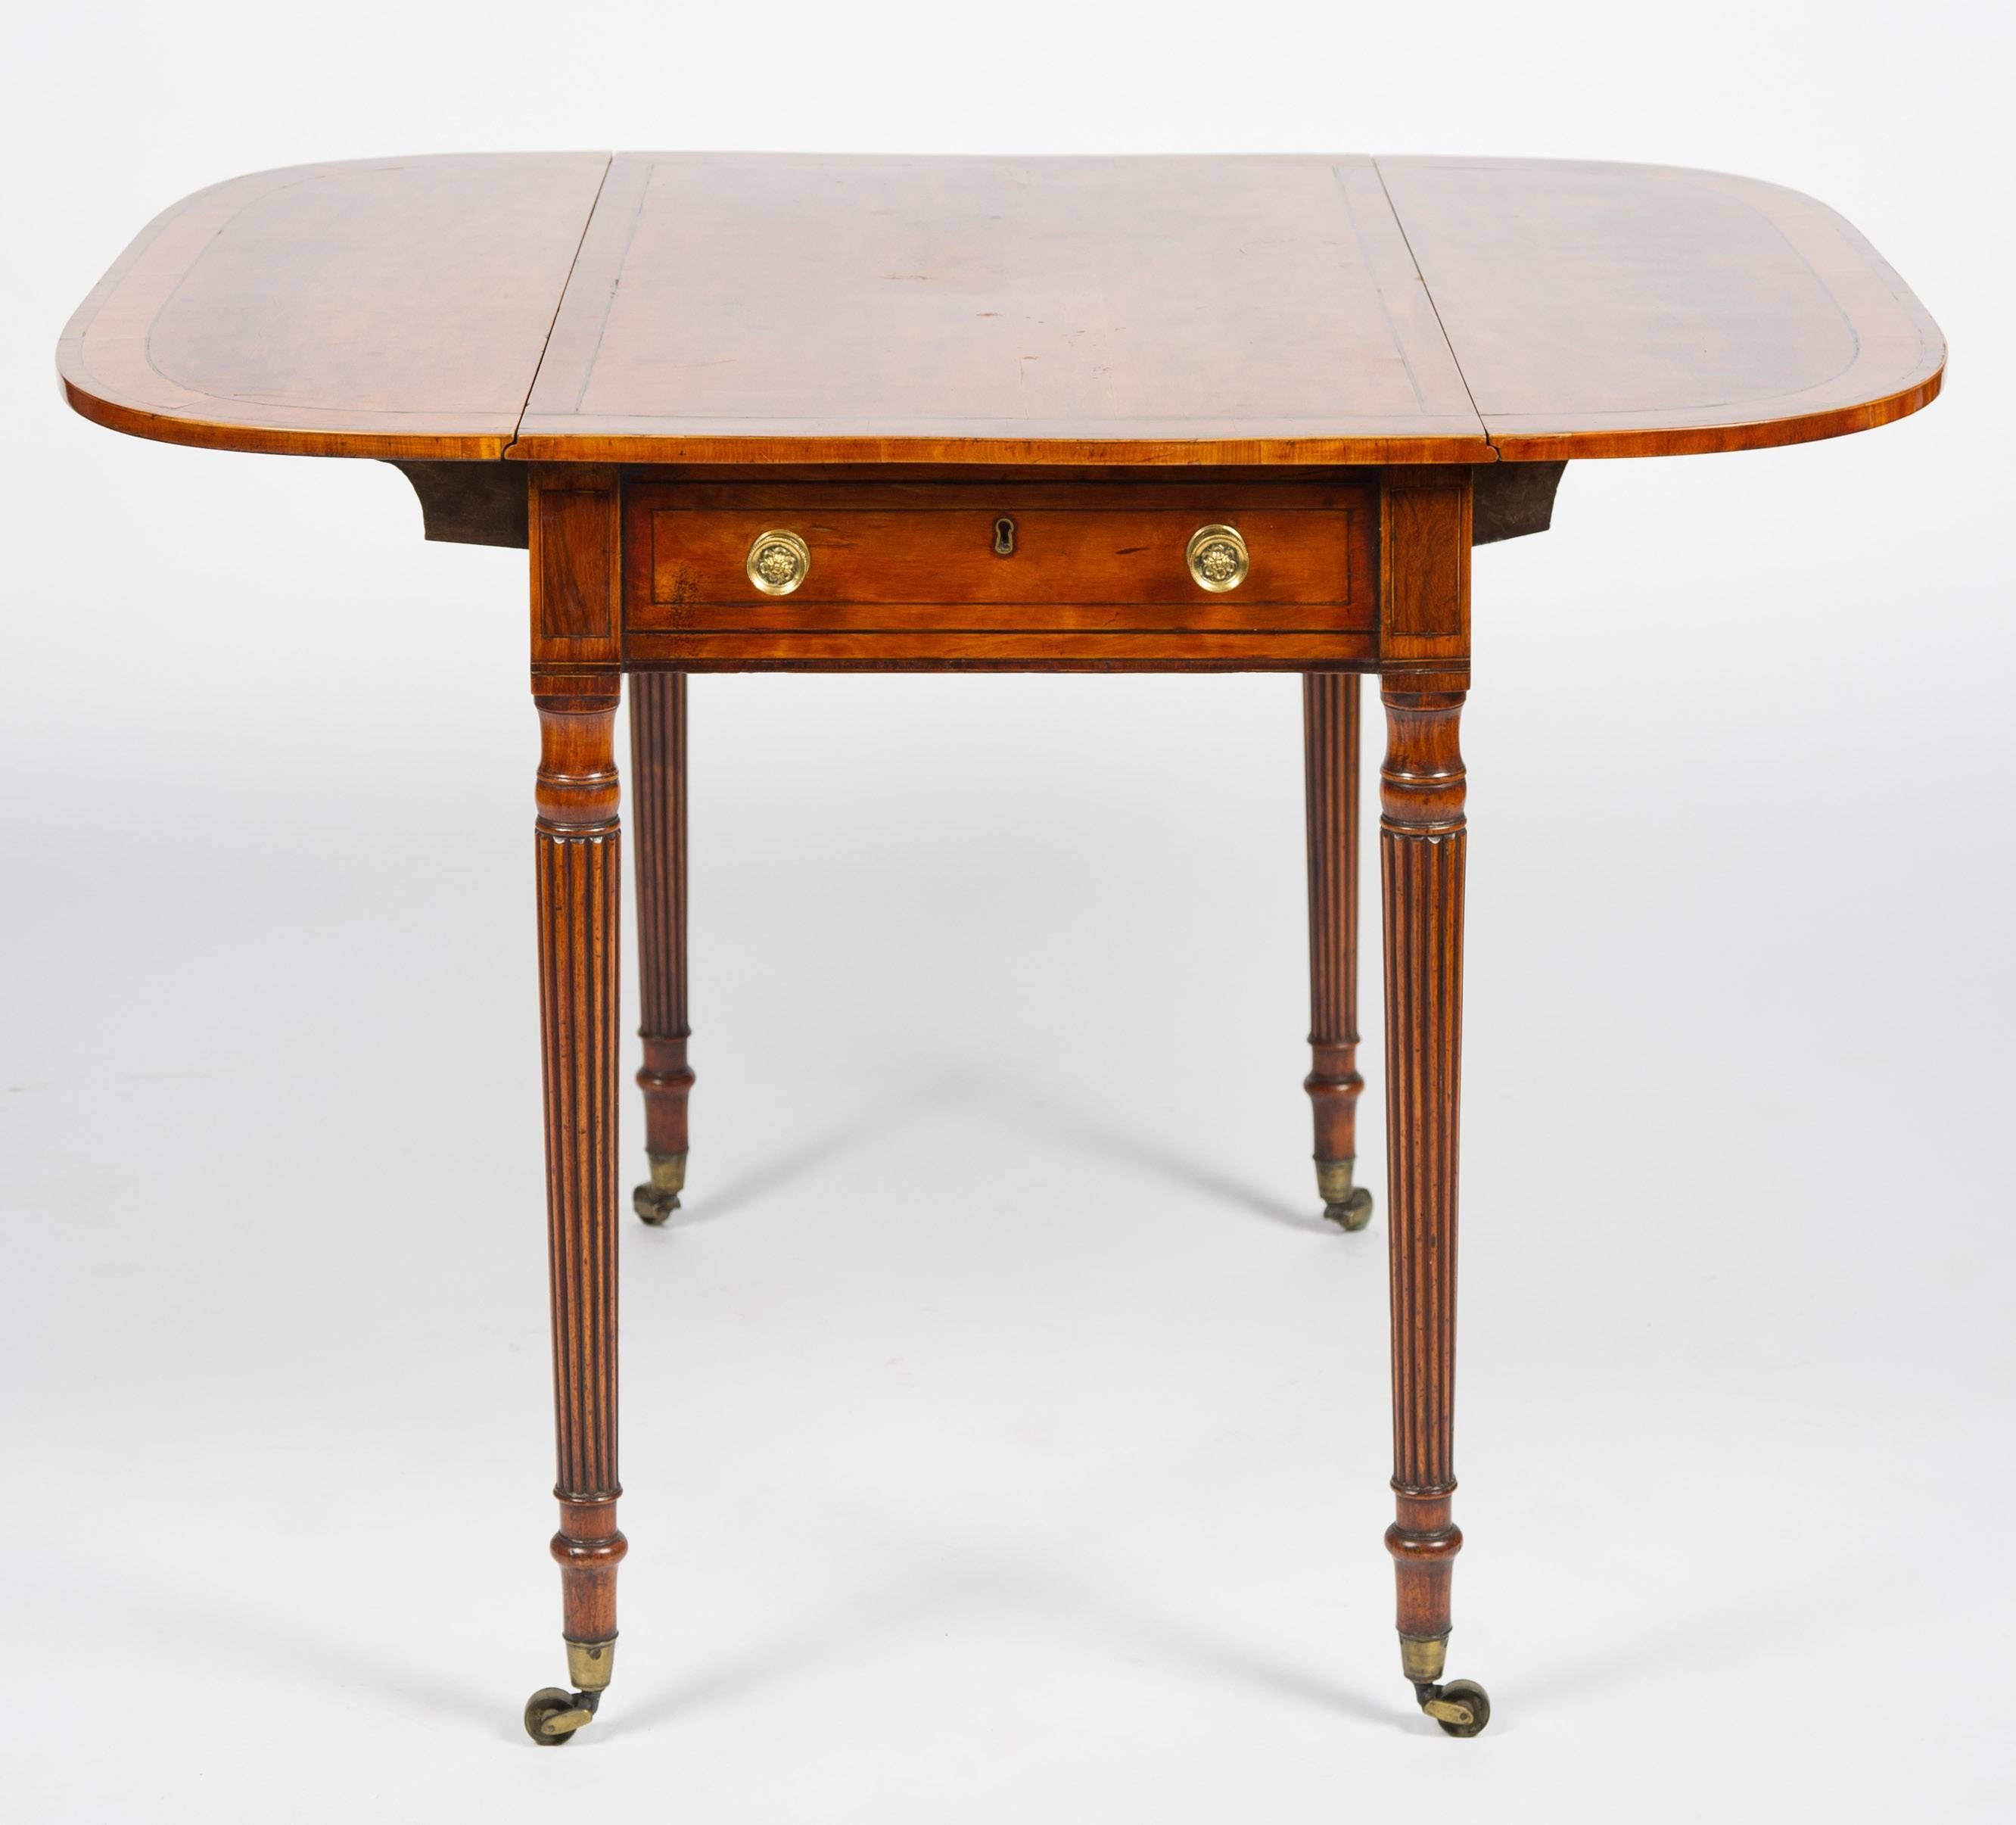 A very good quality early 19th century satinwood pembroke table, in the manner of 'Gillows'. The top being crossbanded, a single frieze drawer with brass handles, raised on turned tapering reeded legs, terminating in the original Brass castors.